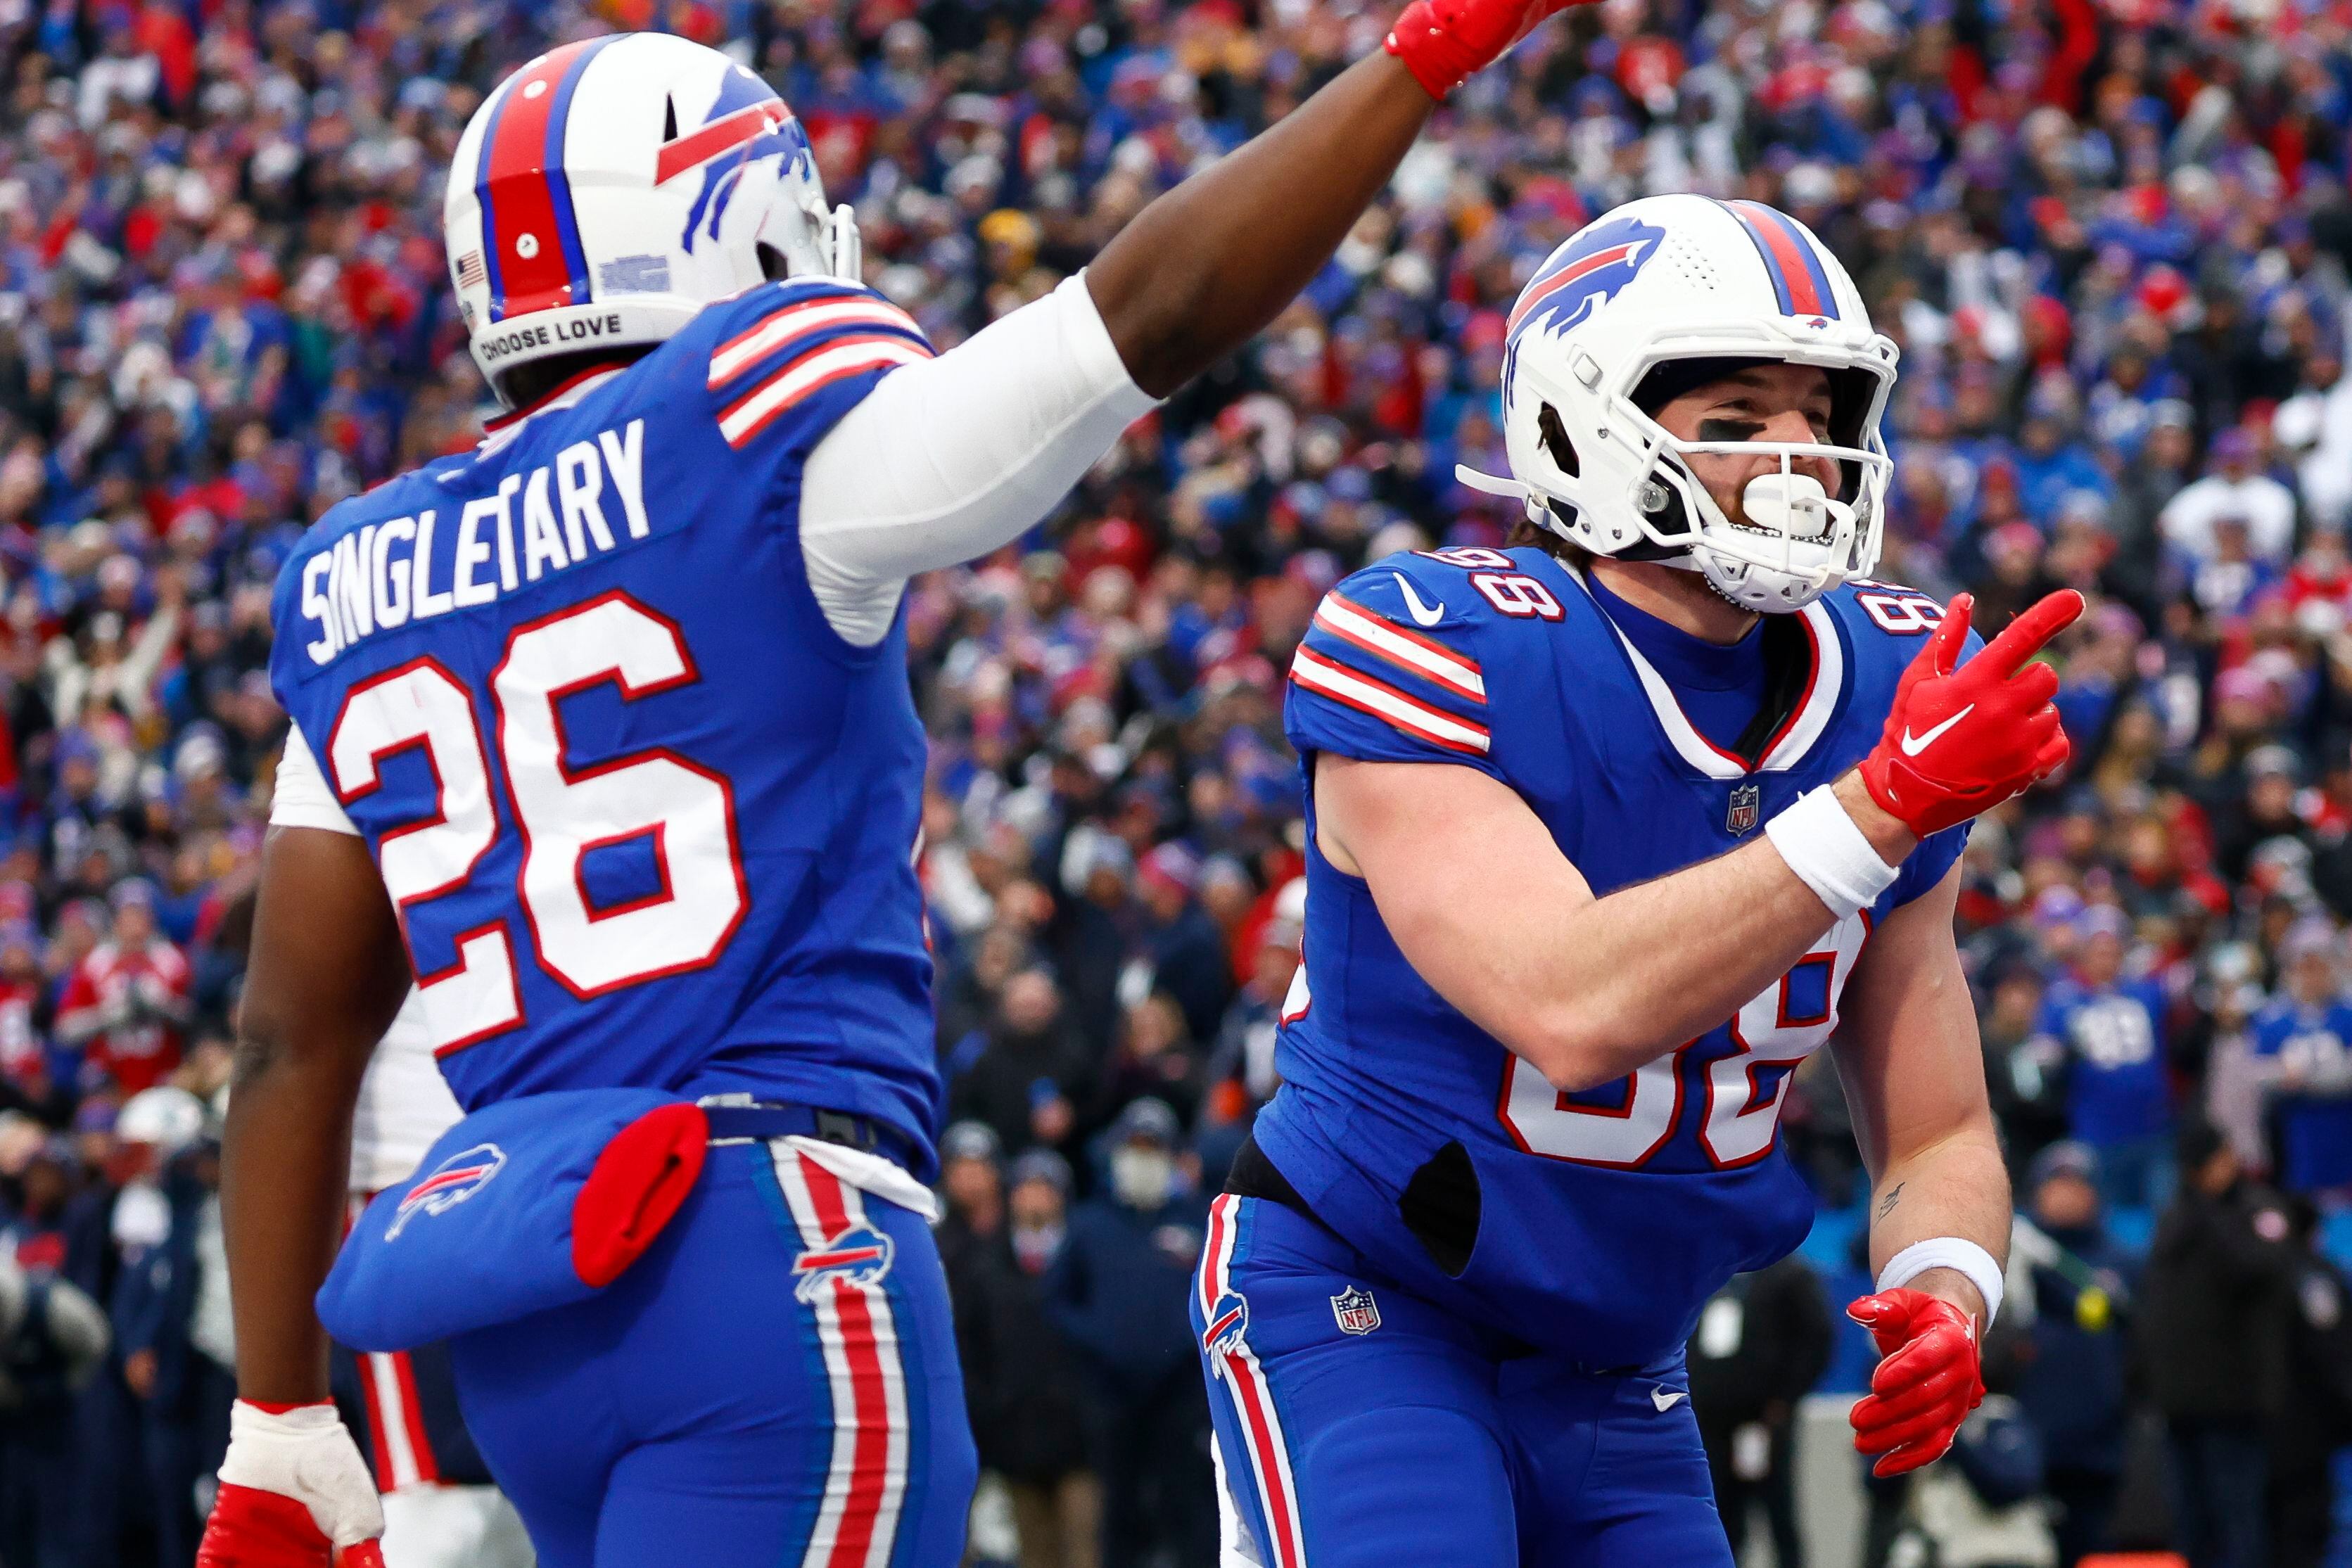 Bills secure the No. 2 seed in AFC after 35-23 win over New England